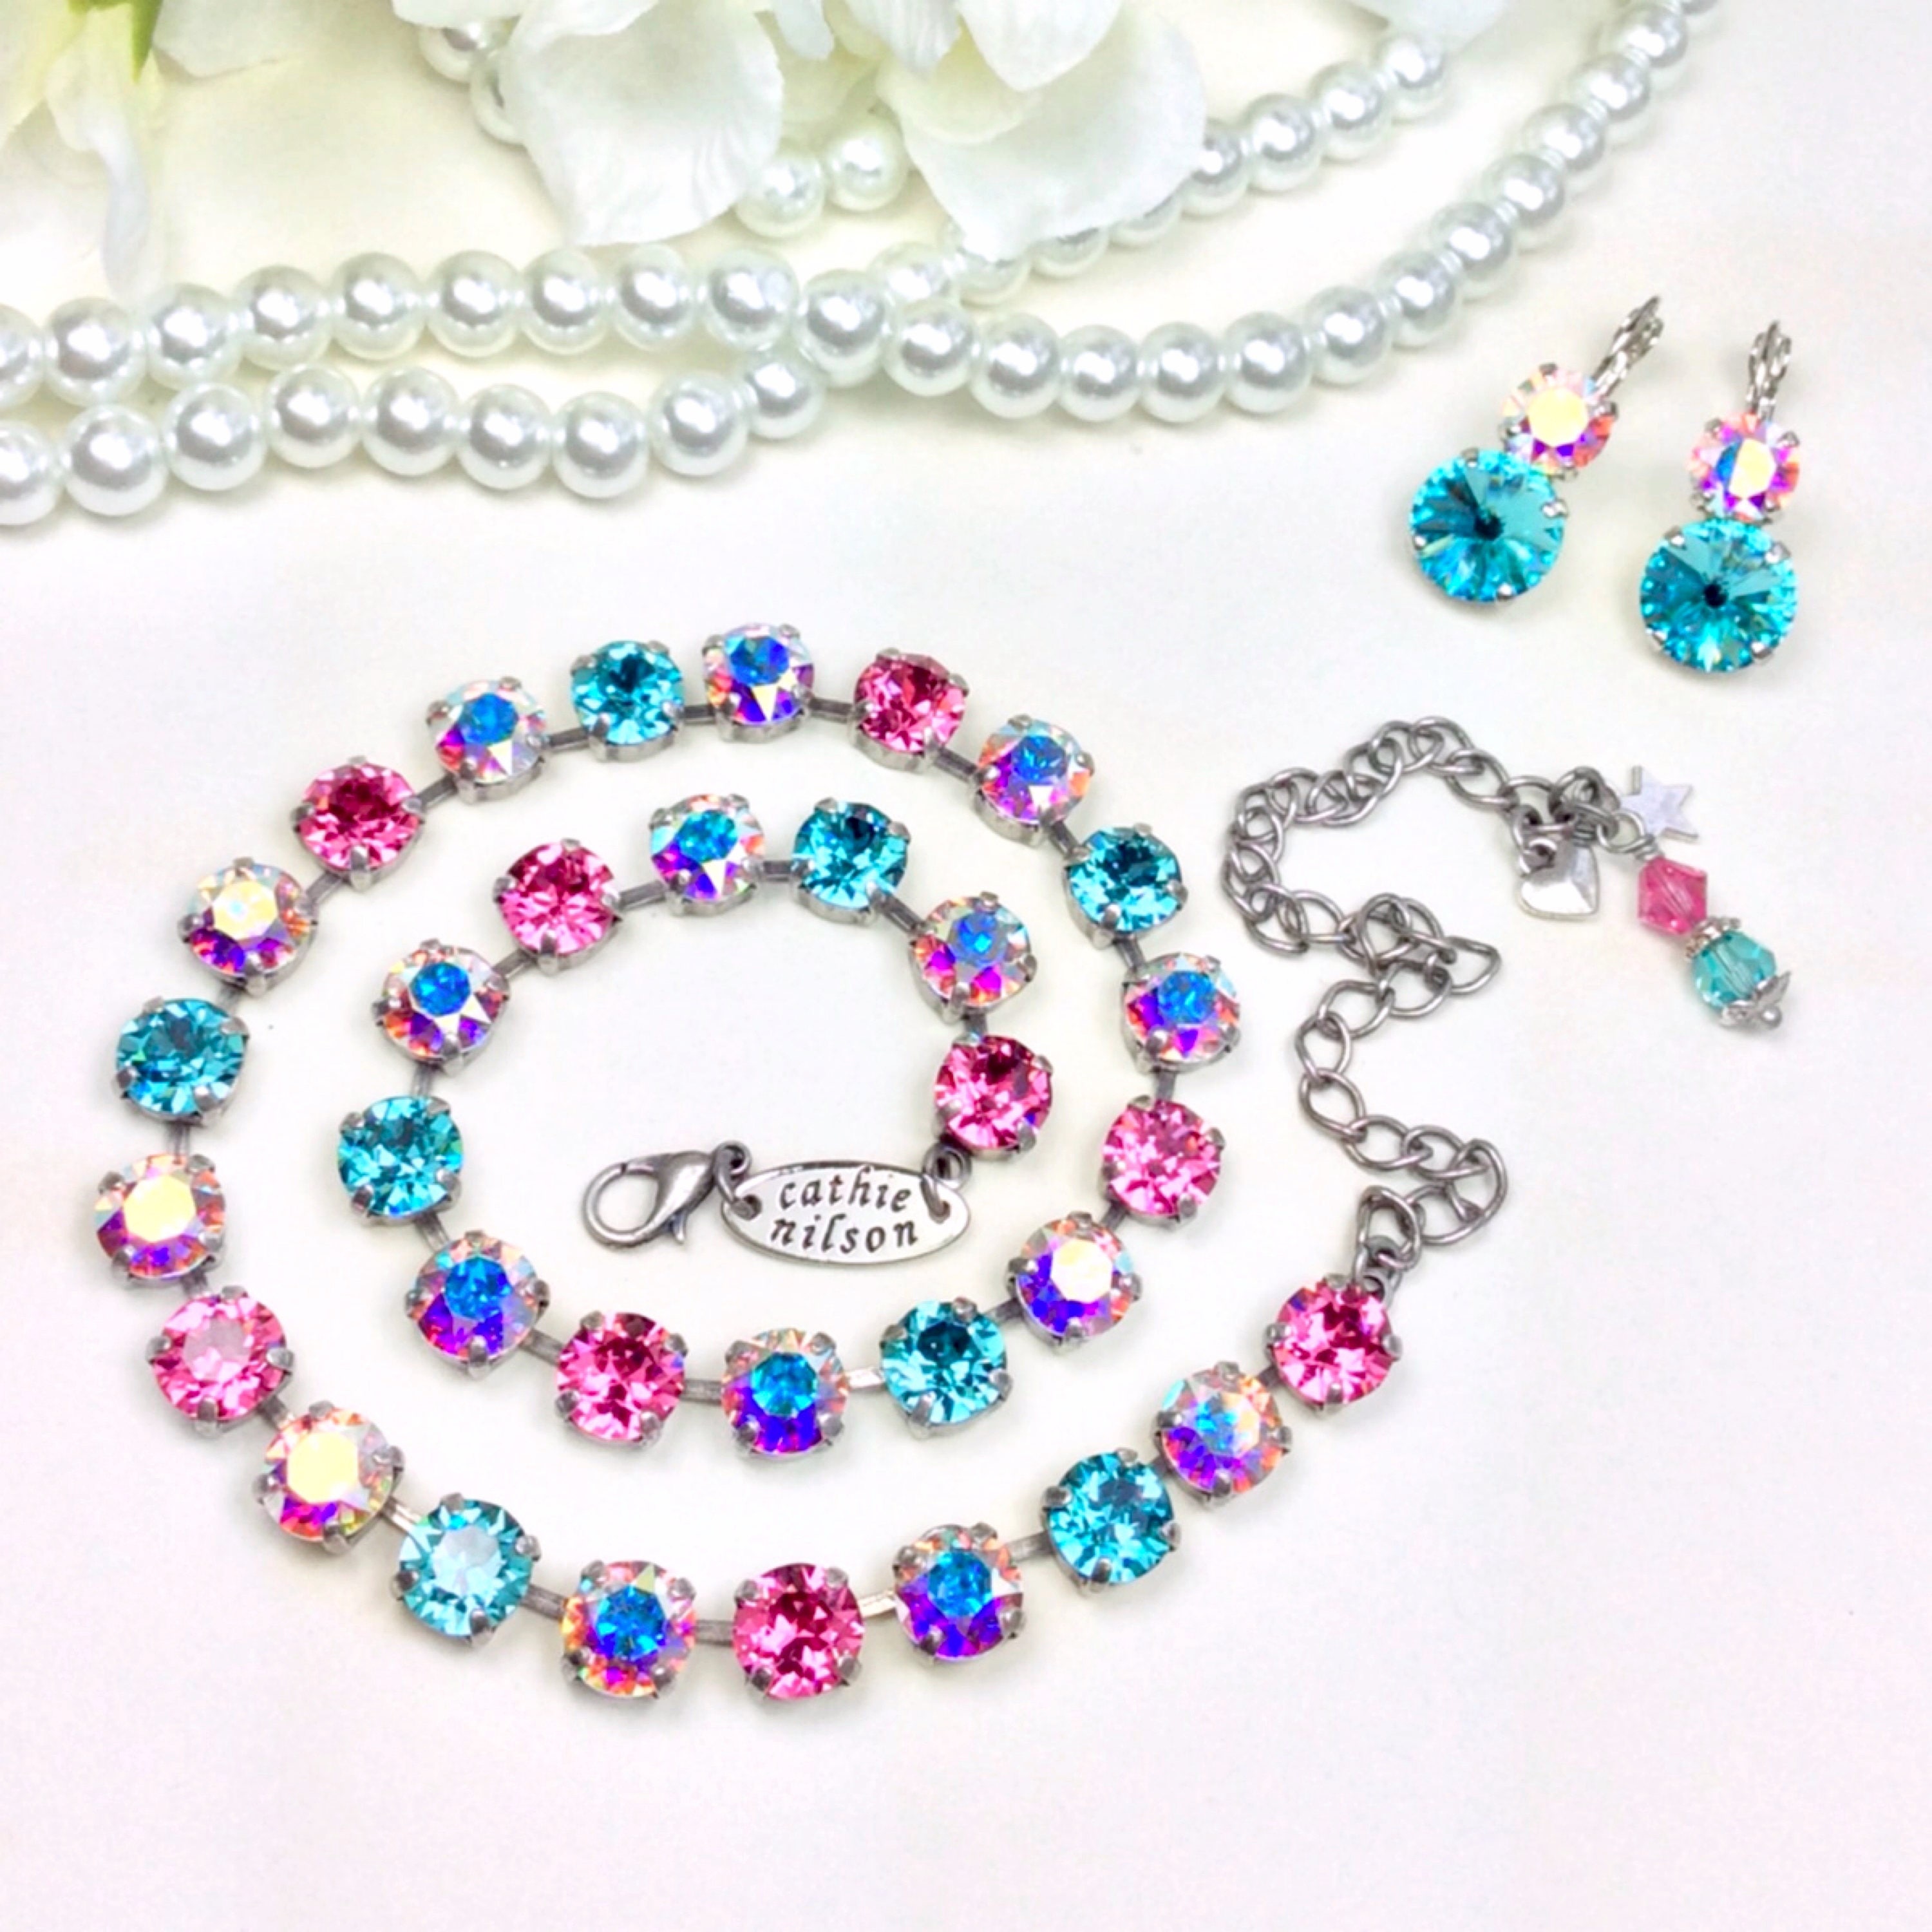 Swarovski Crystal 8.5mm Necklace - Stunning, Beautiful Colors-  Designer Inspired - FREE SHIPPING